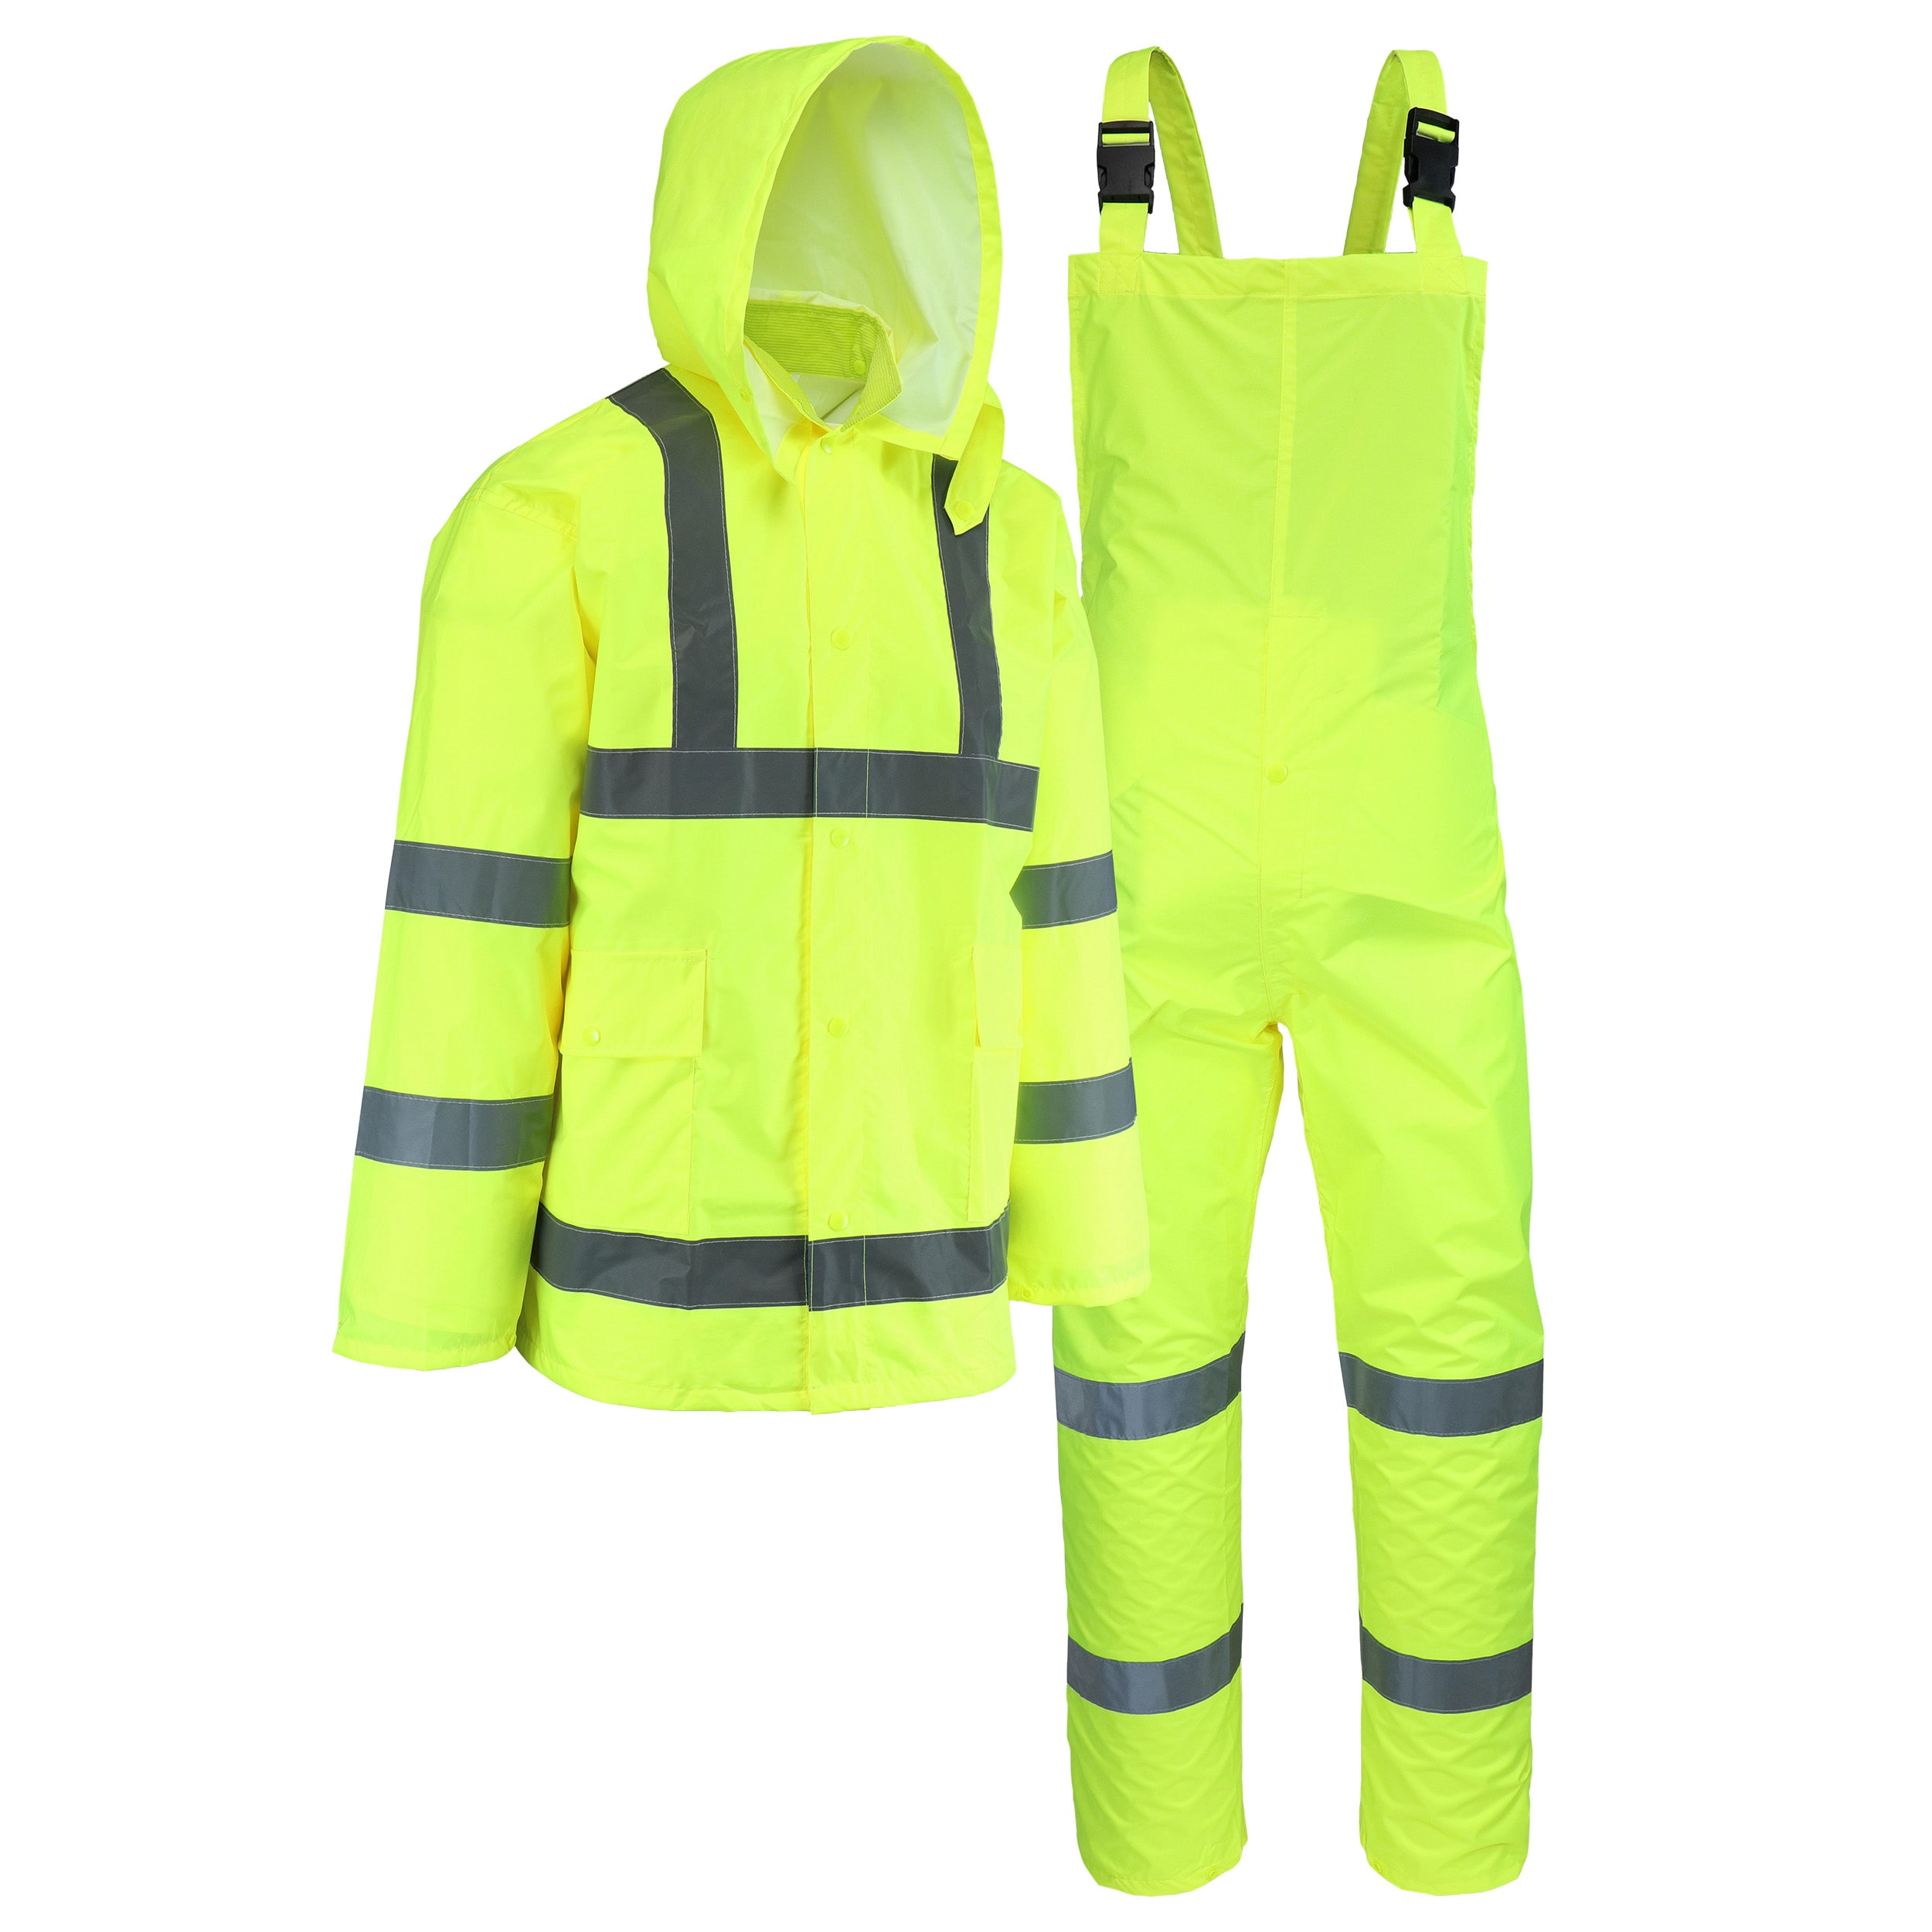 Safety Works 3-Piece Men's Large Yellow Rain the Rain Gear at Lowes.com